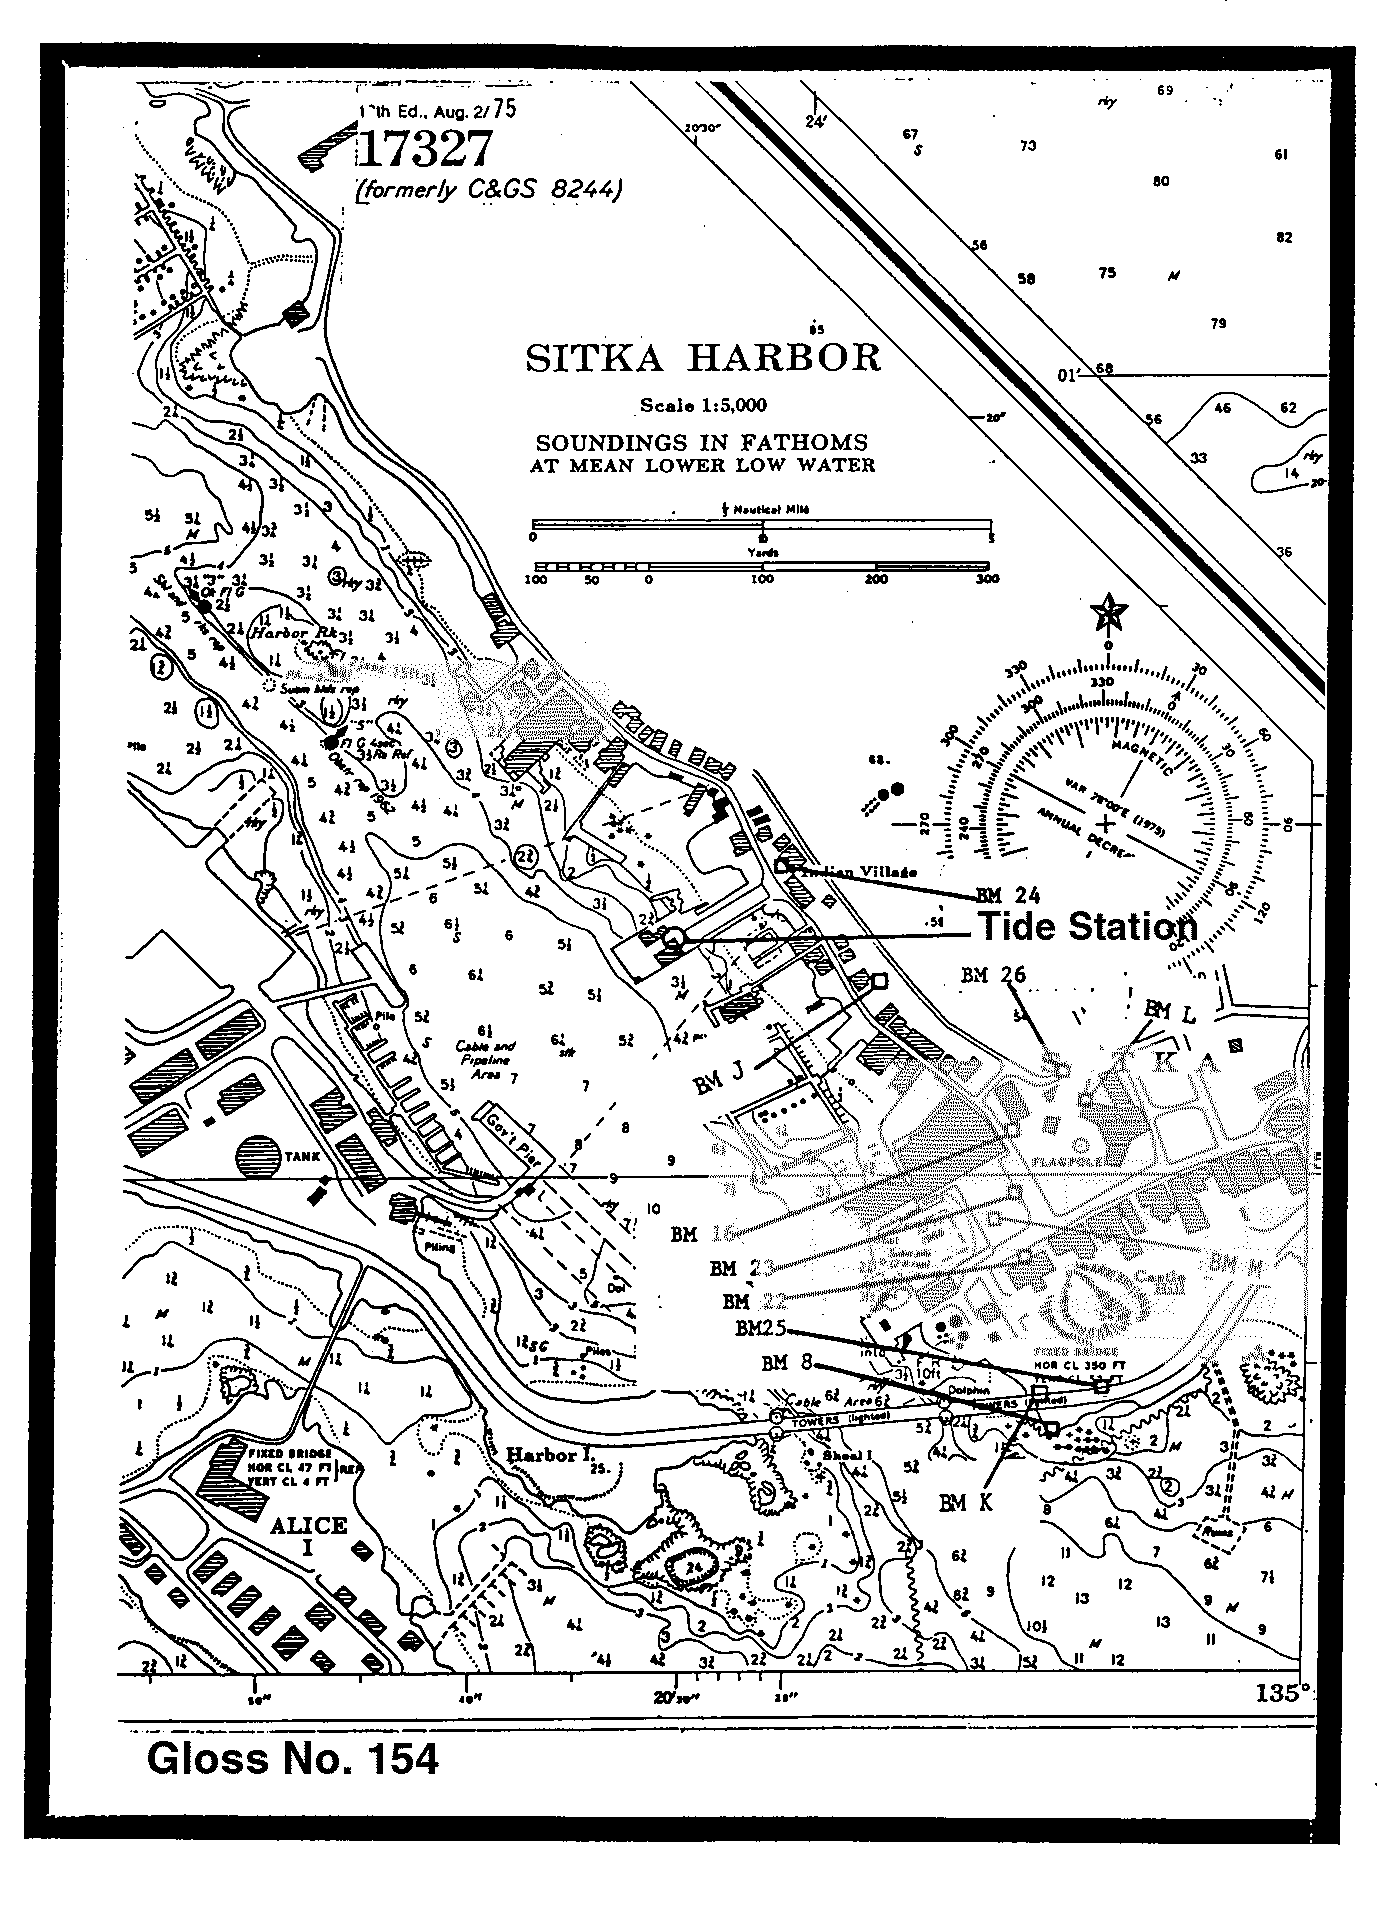 Location map for Sitka, AK, U.S.A.